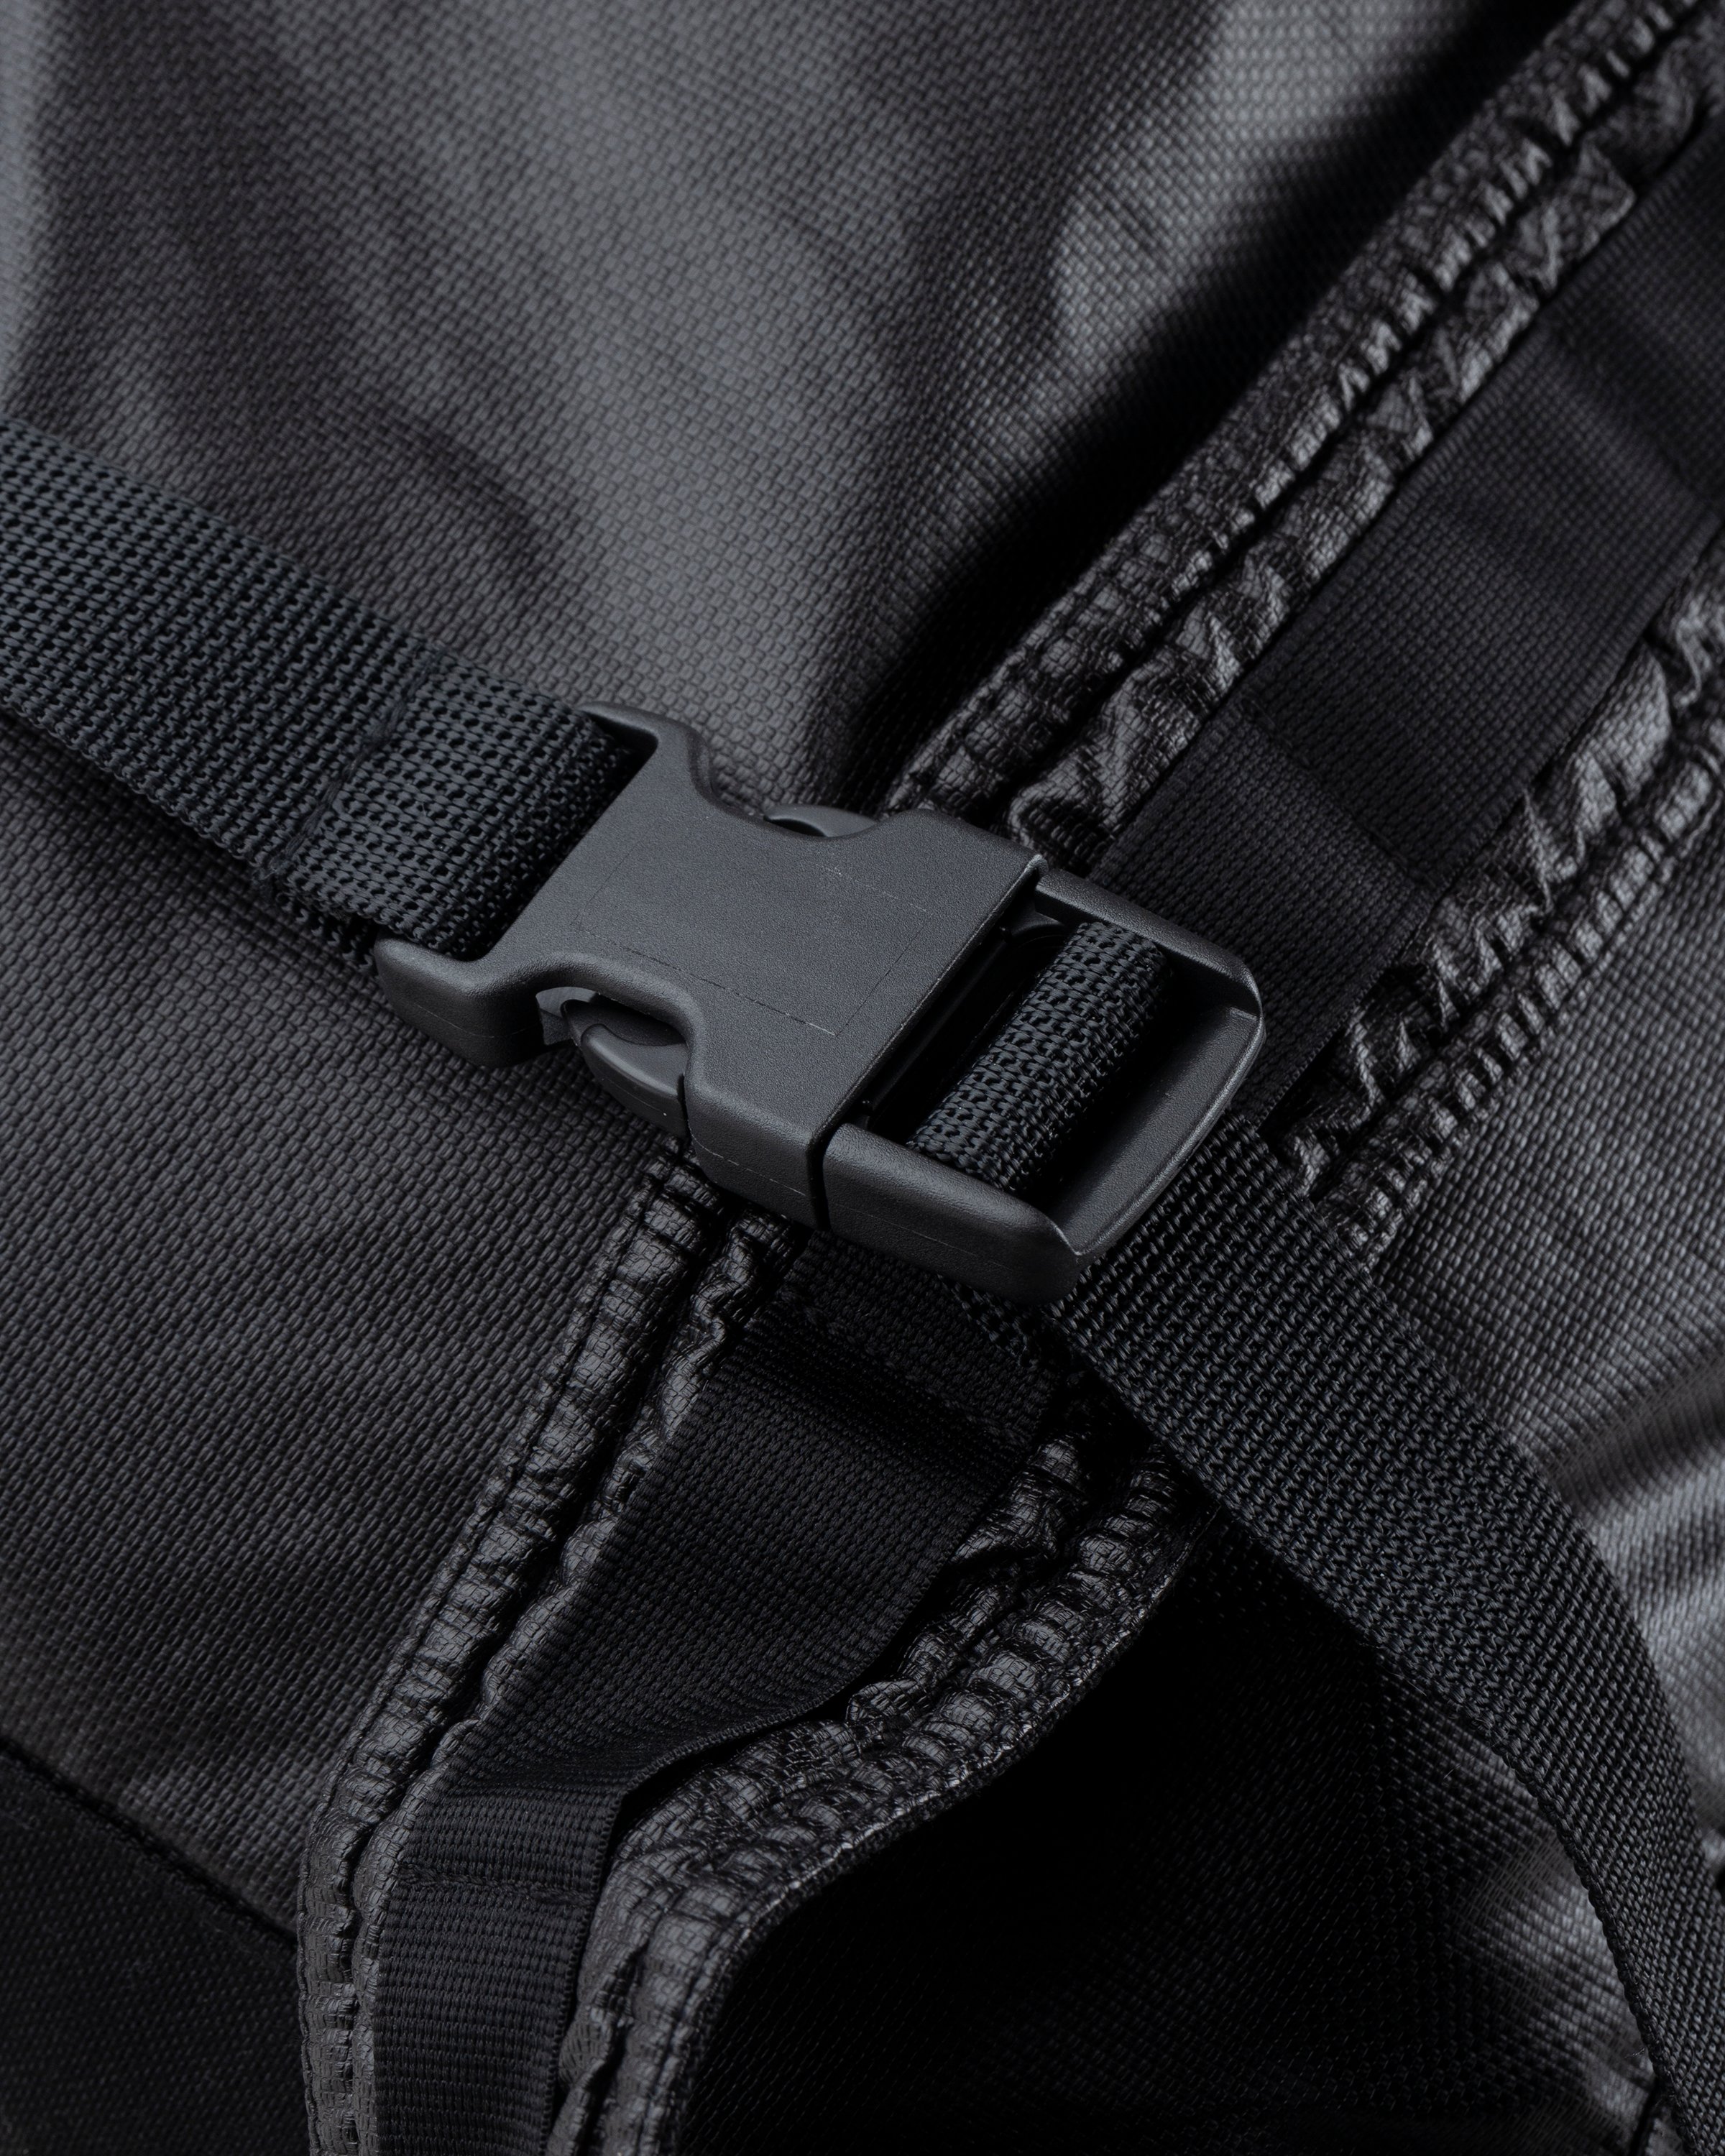 Stone Island - 90370 Dyed Backpack Black - Accessories - Black - Image 7